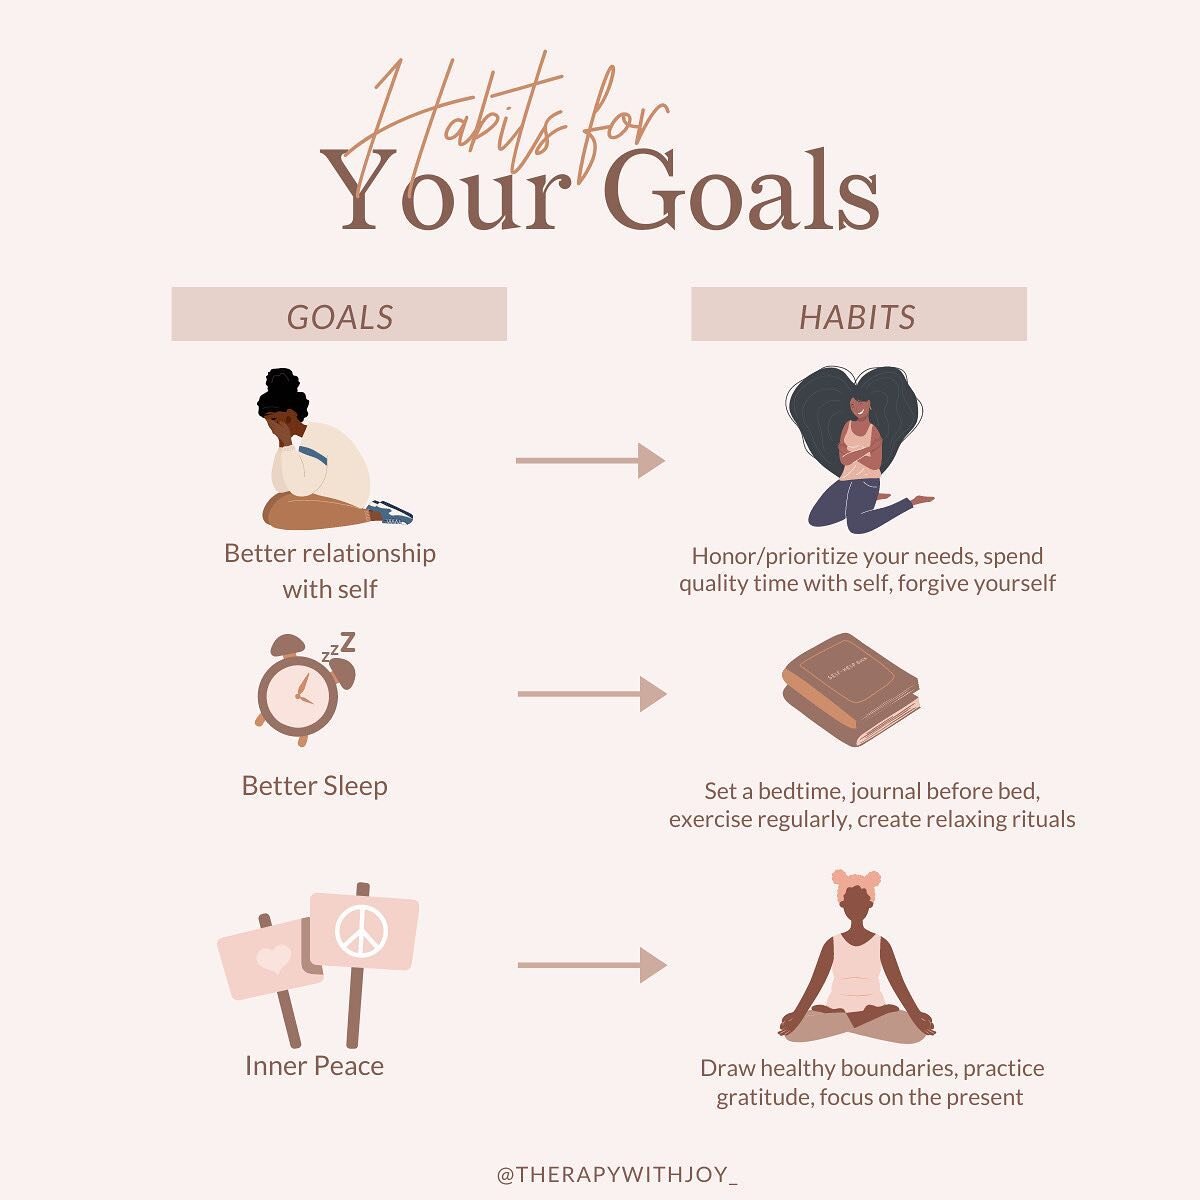 Our greatest goals begin with the formation of healthy habits! Here are a few ideas of how to structure healthy habits that are relevant to your wellness goals.